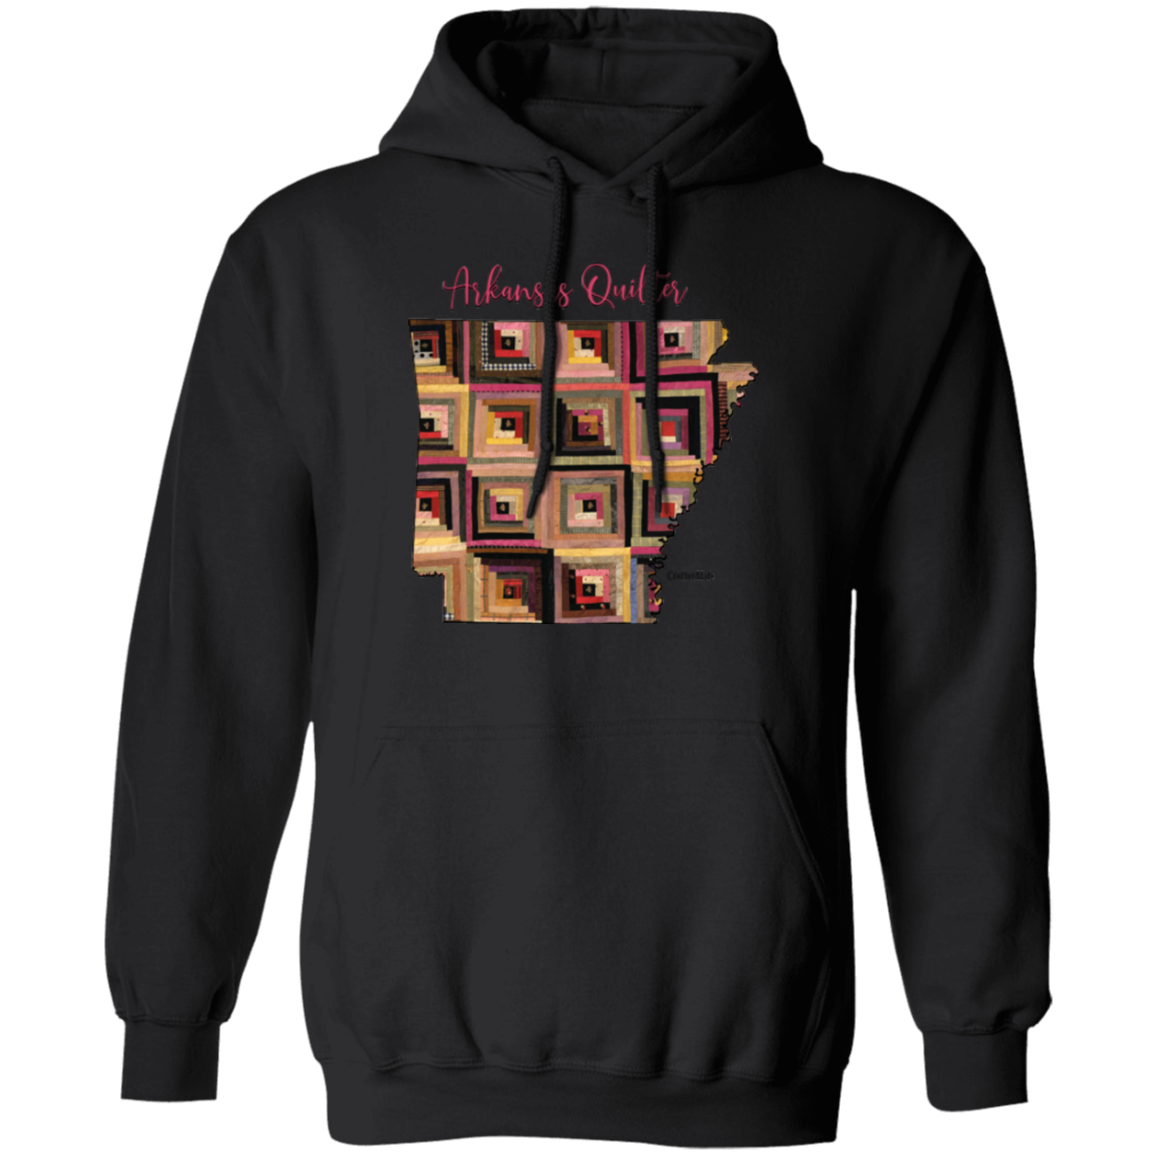 Arkansas Quilter Pullover Hoodie, Gift for Quilting Friends and Family